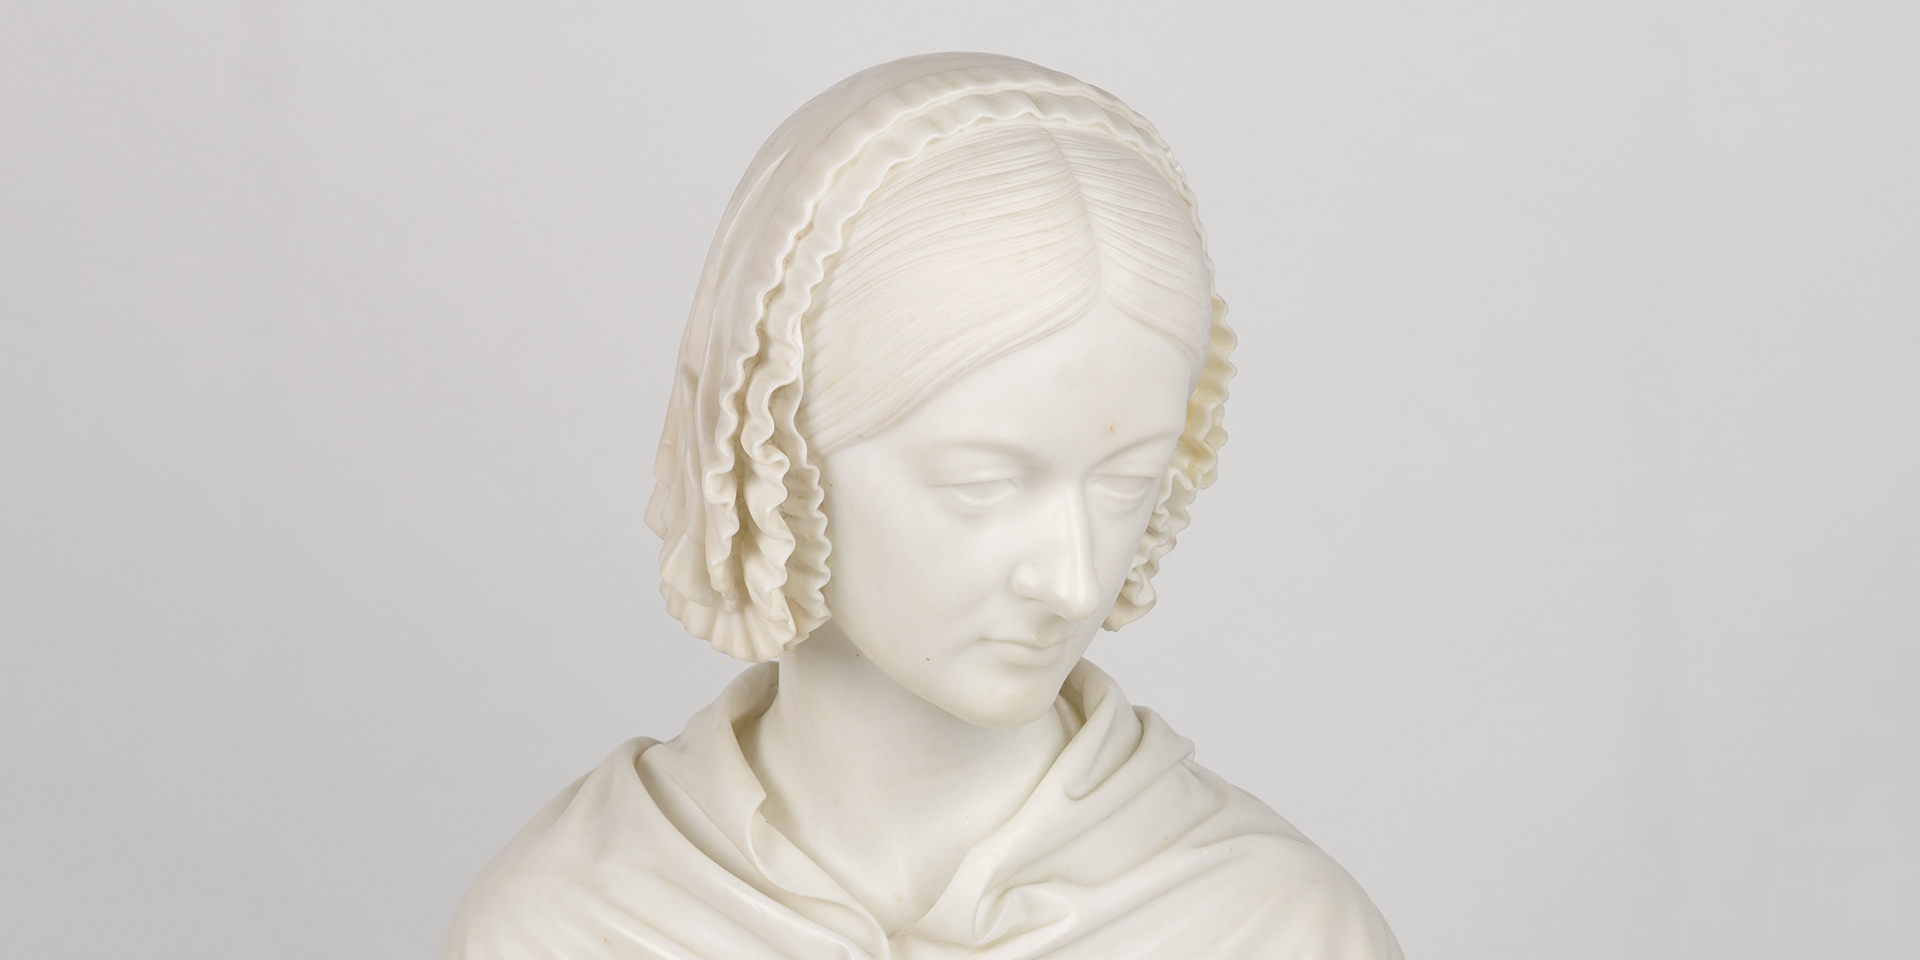 Bust presented to Florence Nightingale by men of the British Army in 1862